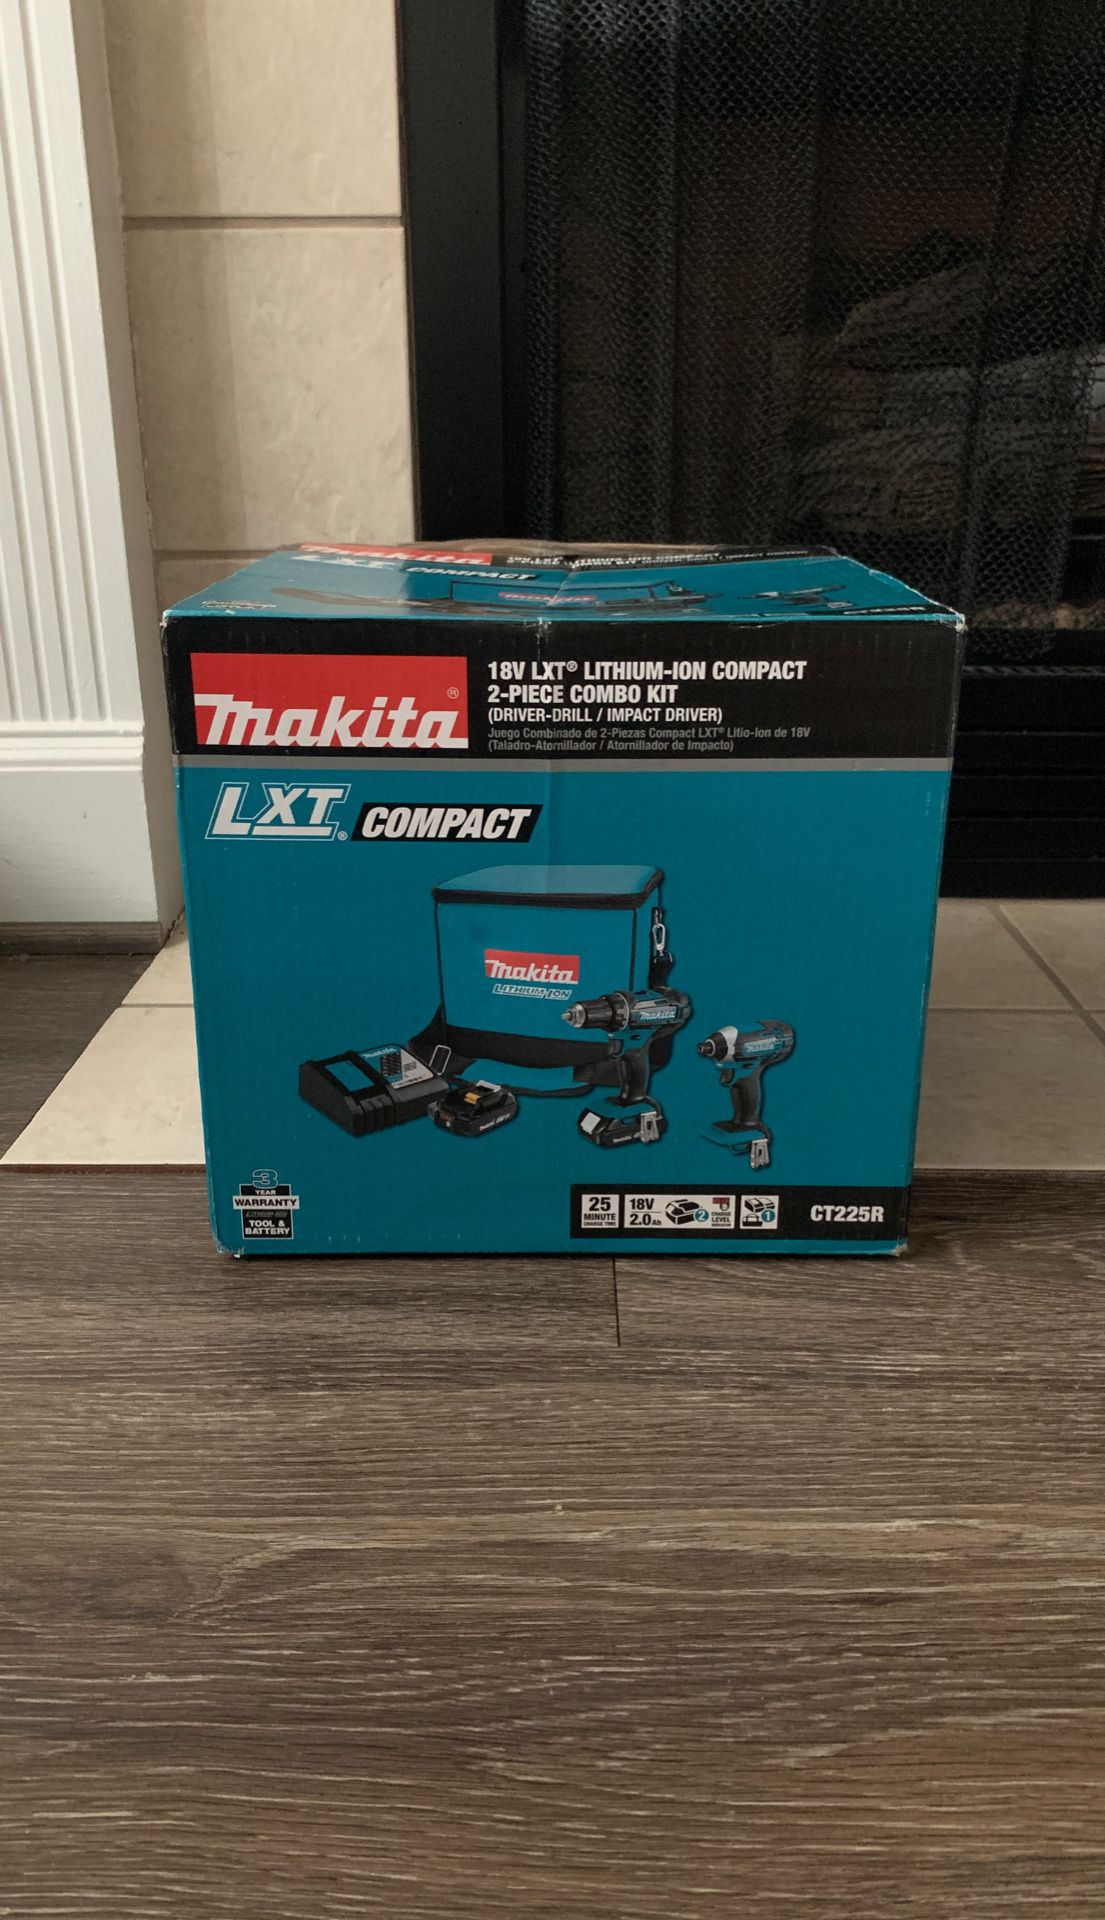 18V LXT Lithium-ion Compact 2 piece Combo Kit (Drover Drill/Impact Driver)